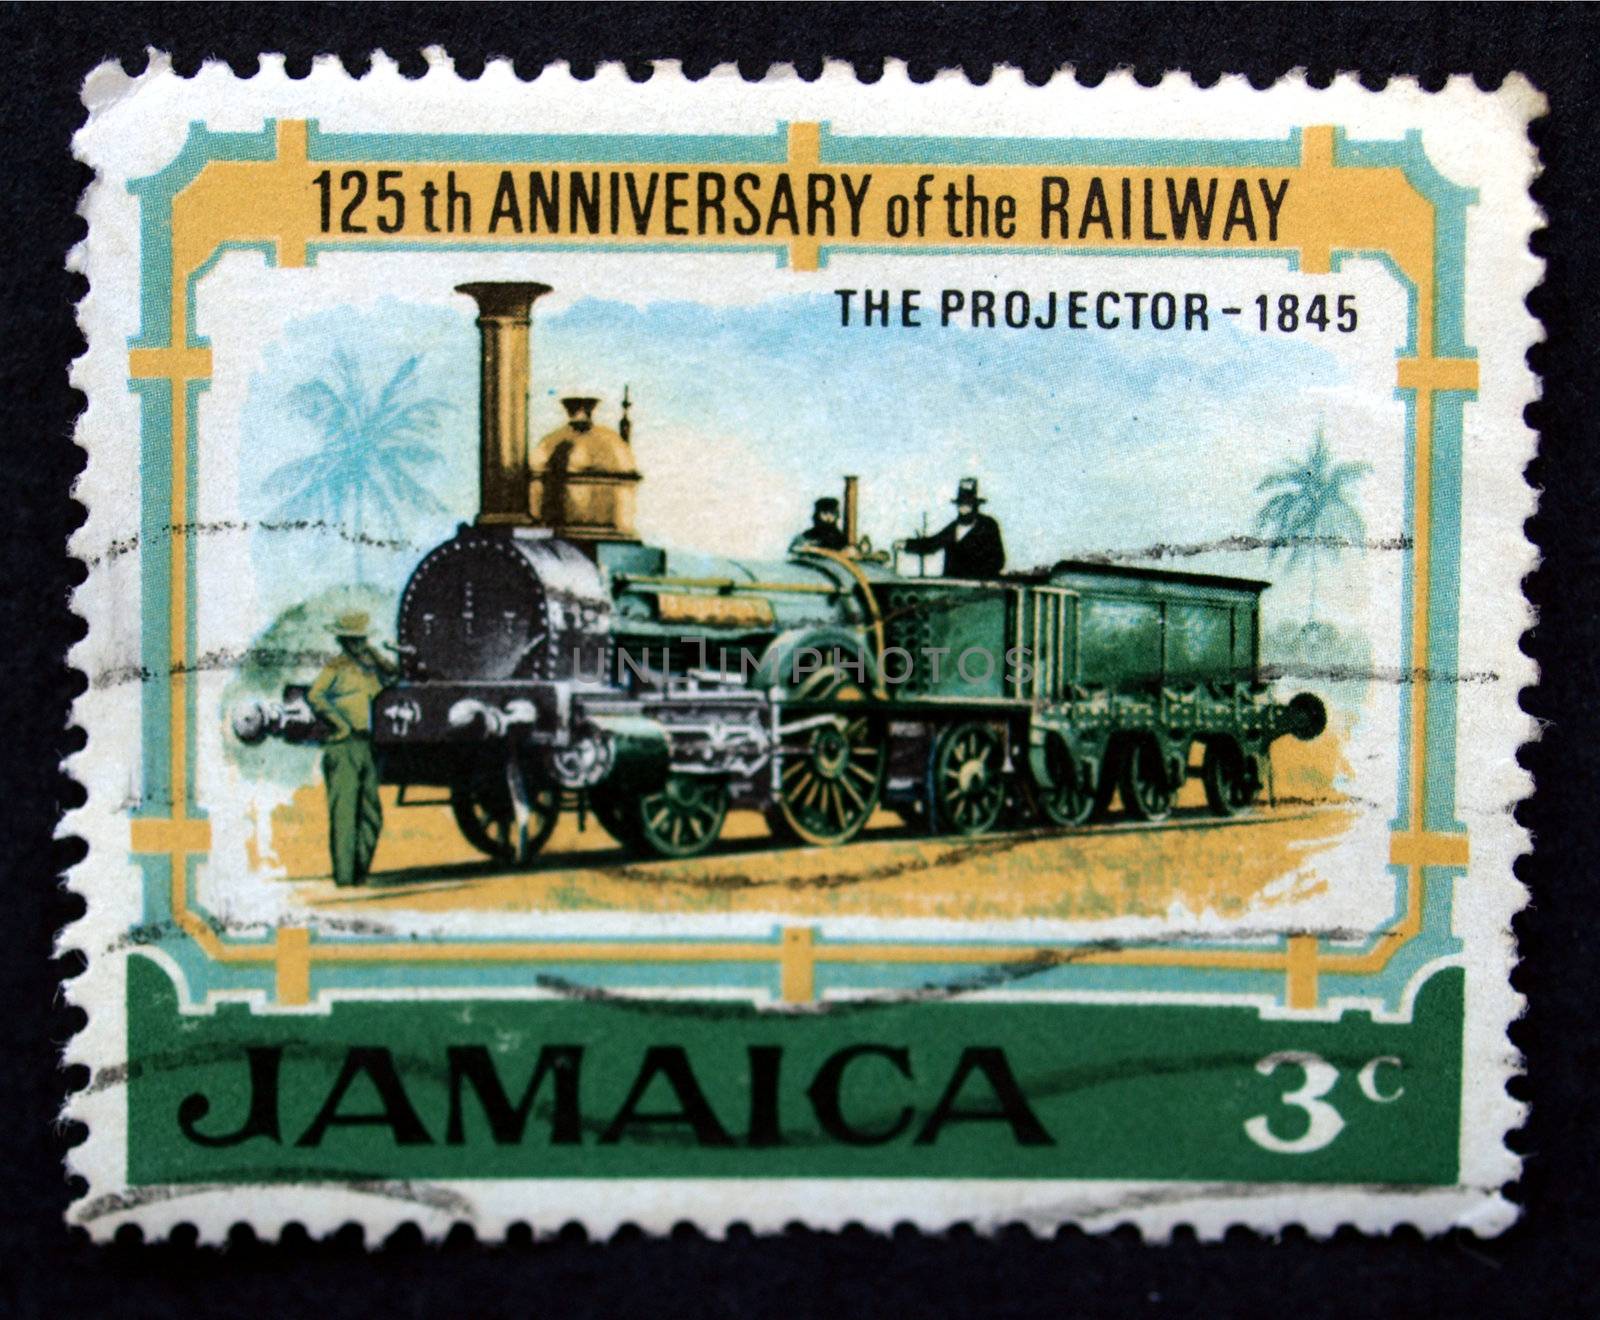 Jamaican postage stamp from Jamaica with trains